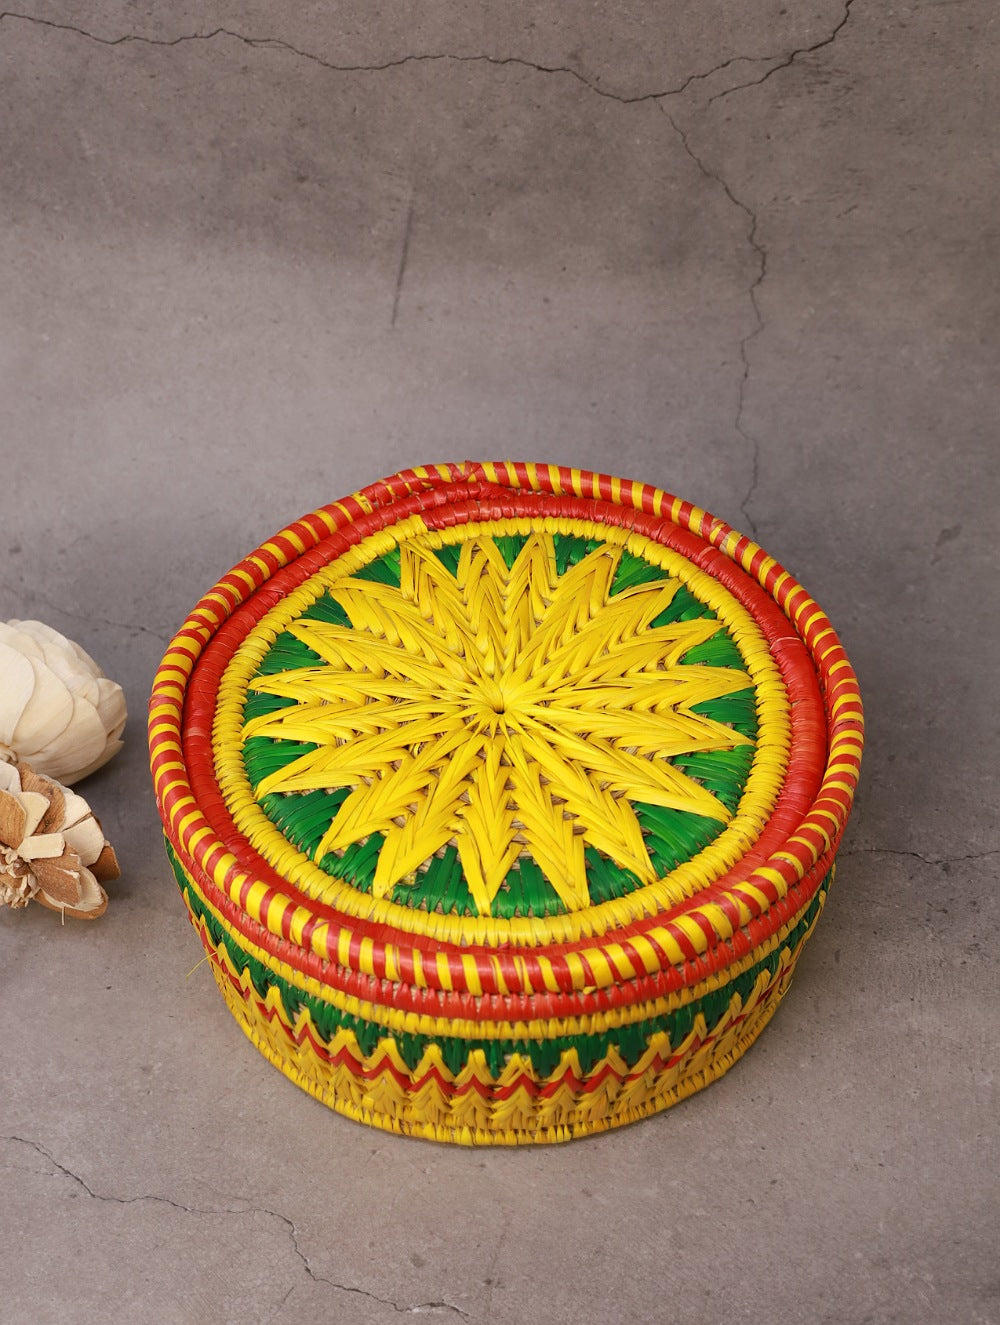 Load image into Gallery viewer, Handcrafted Bhadohi Multiutility  Basket - Yellow